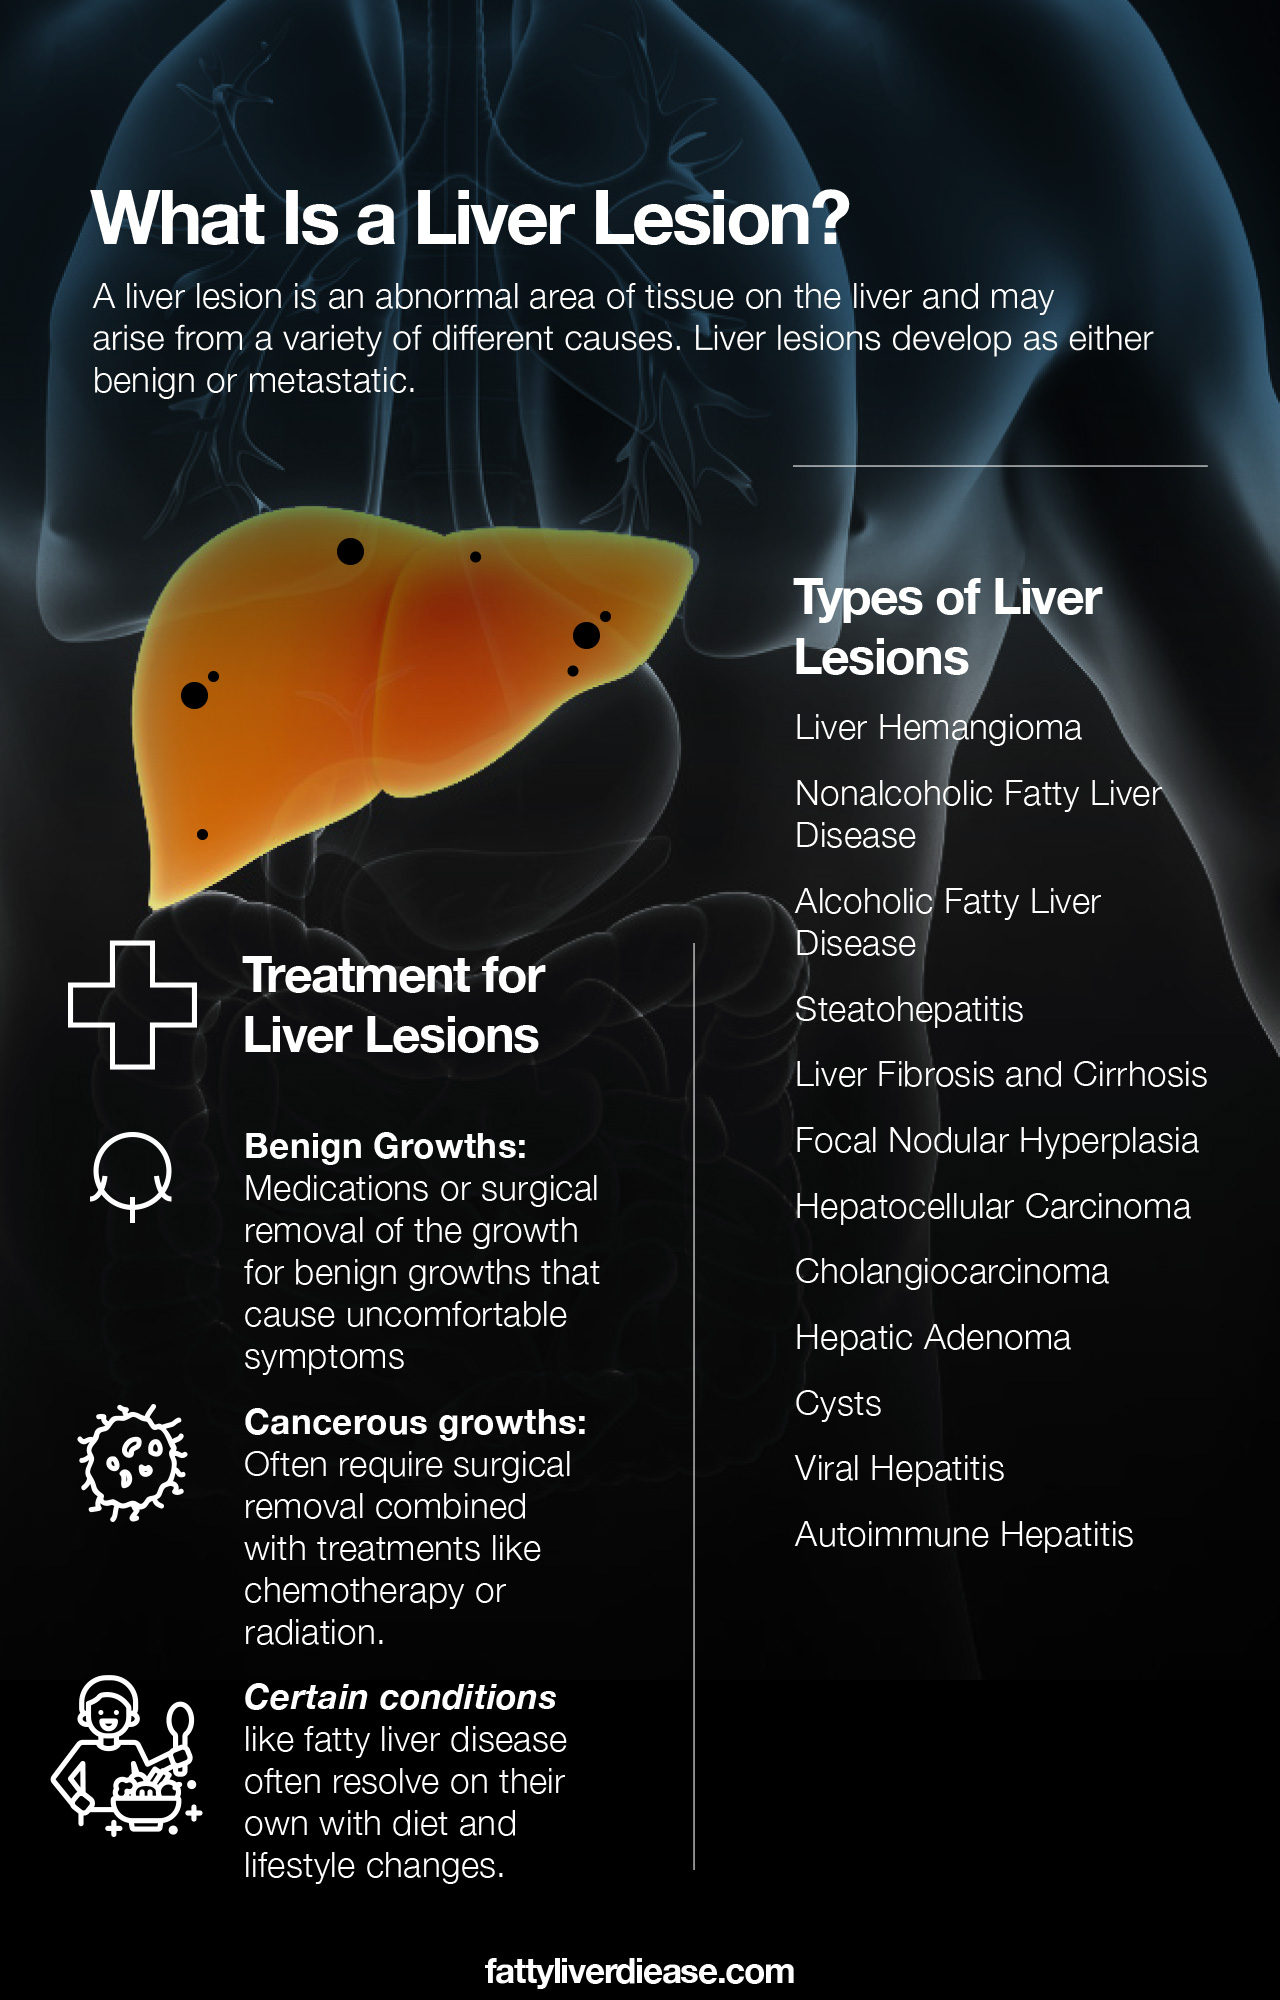 What Is a Liver Lesion?